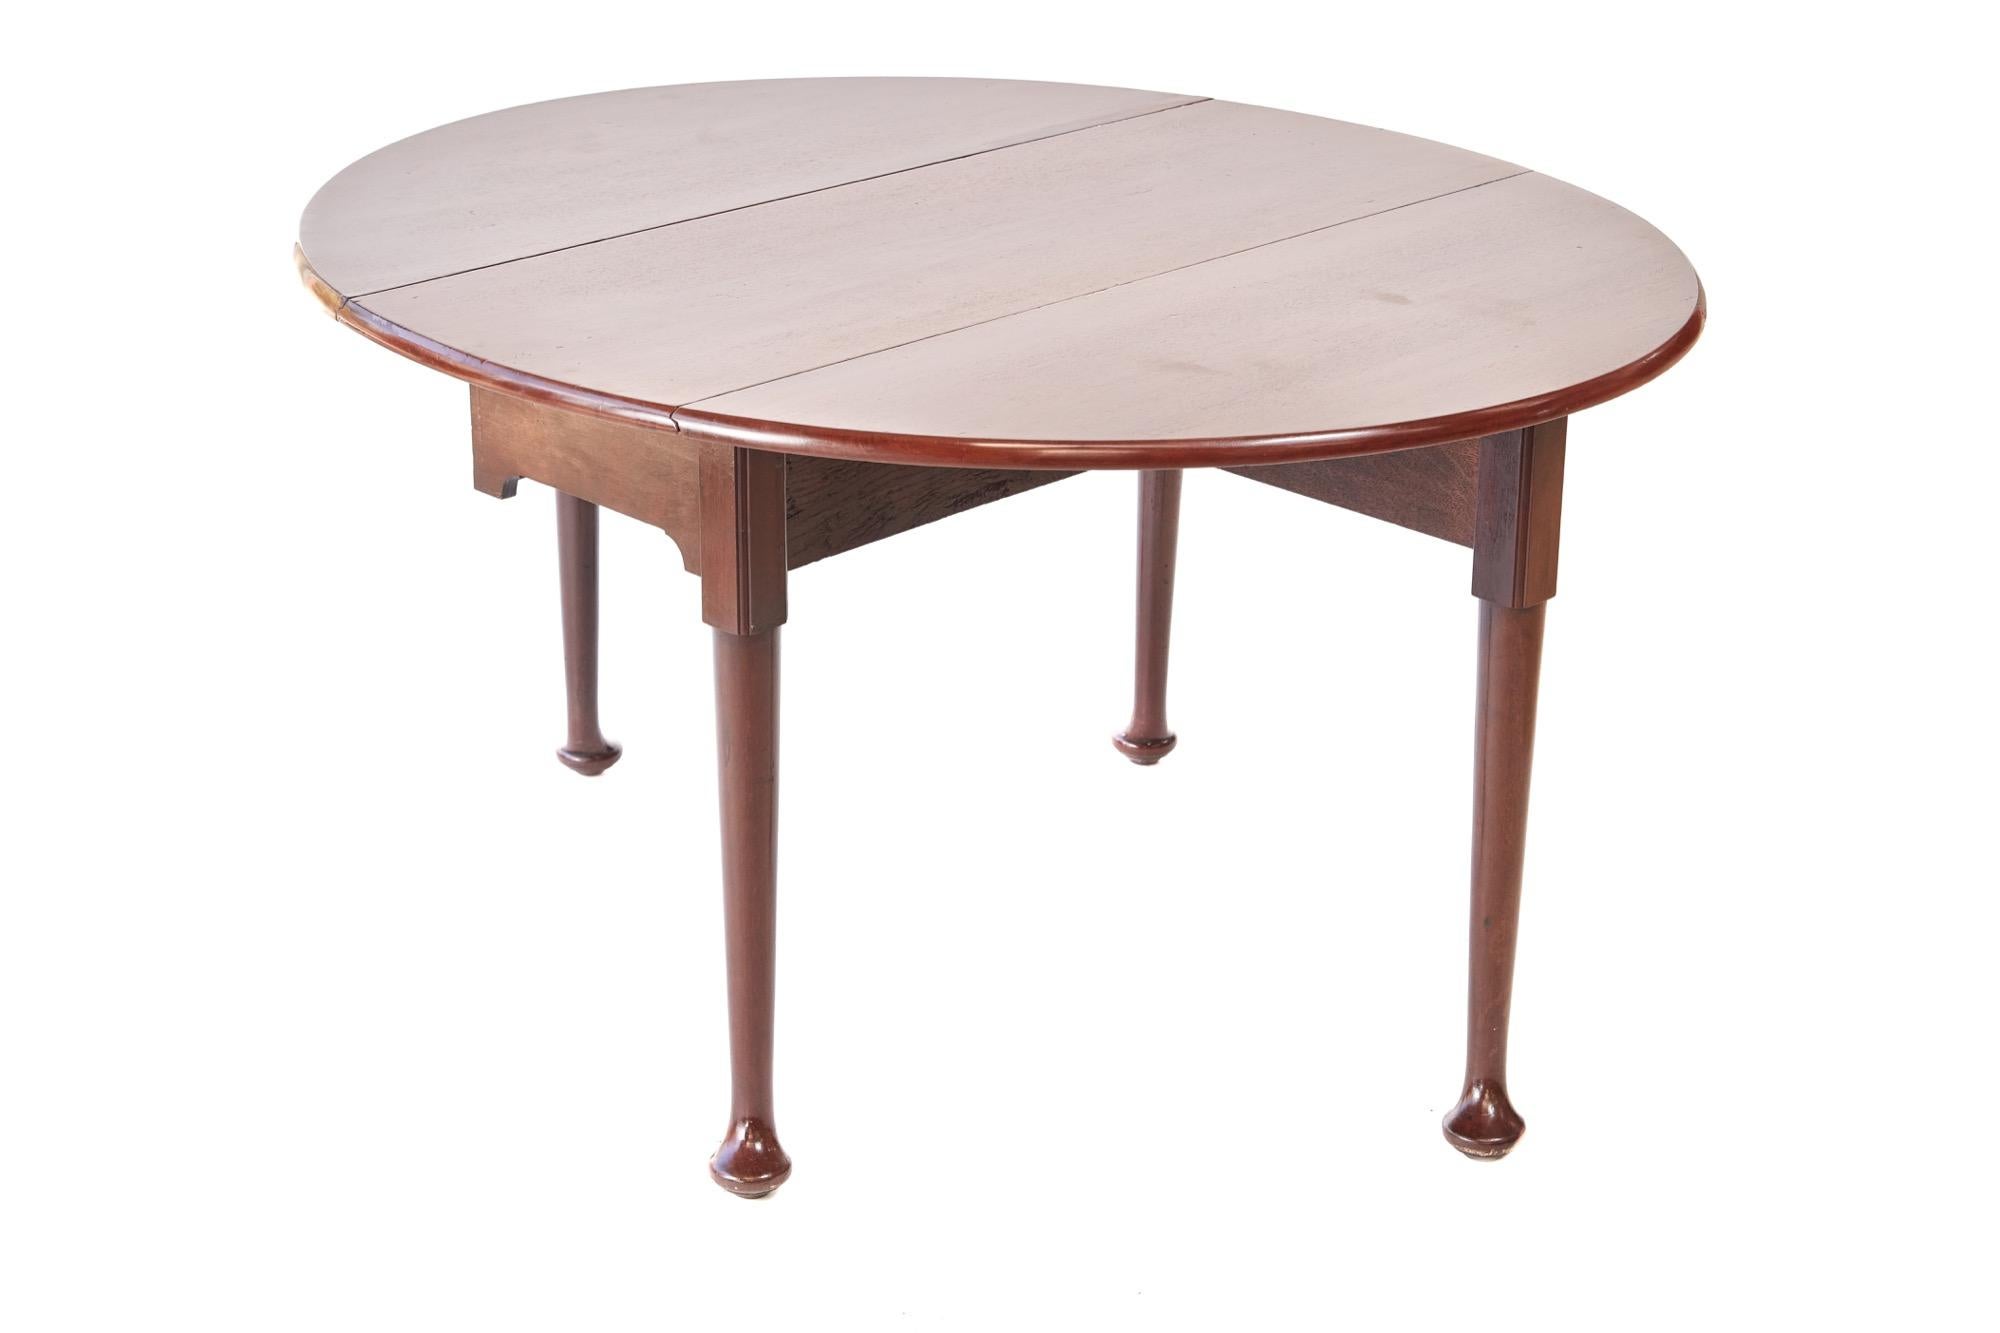 George III mahogany drop-leaf dining table, having a lovely quality solid mahogany top with two drop leaves, supported by turned legs with pad feet
Lovely color and condition
Closed 45